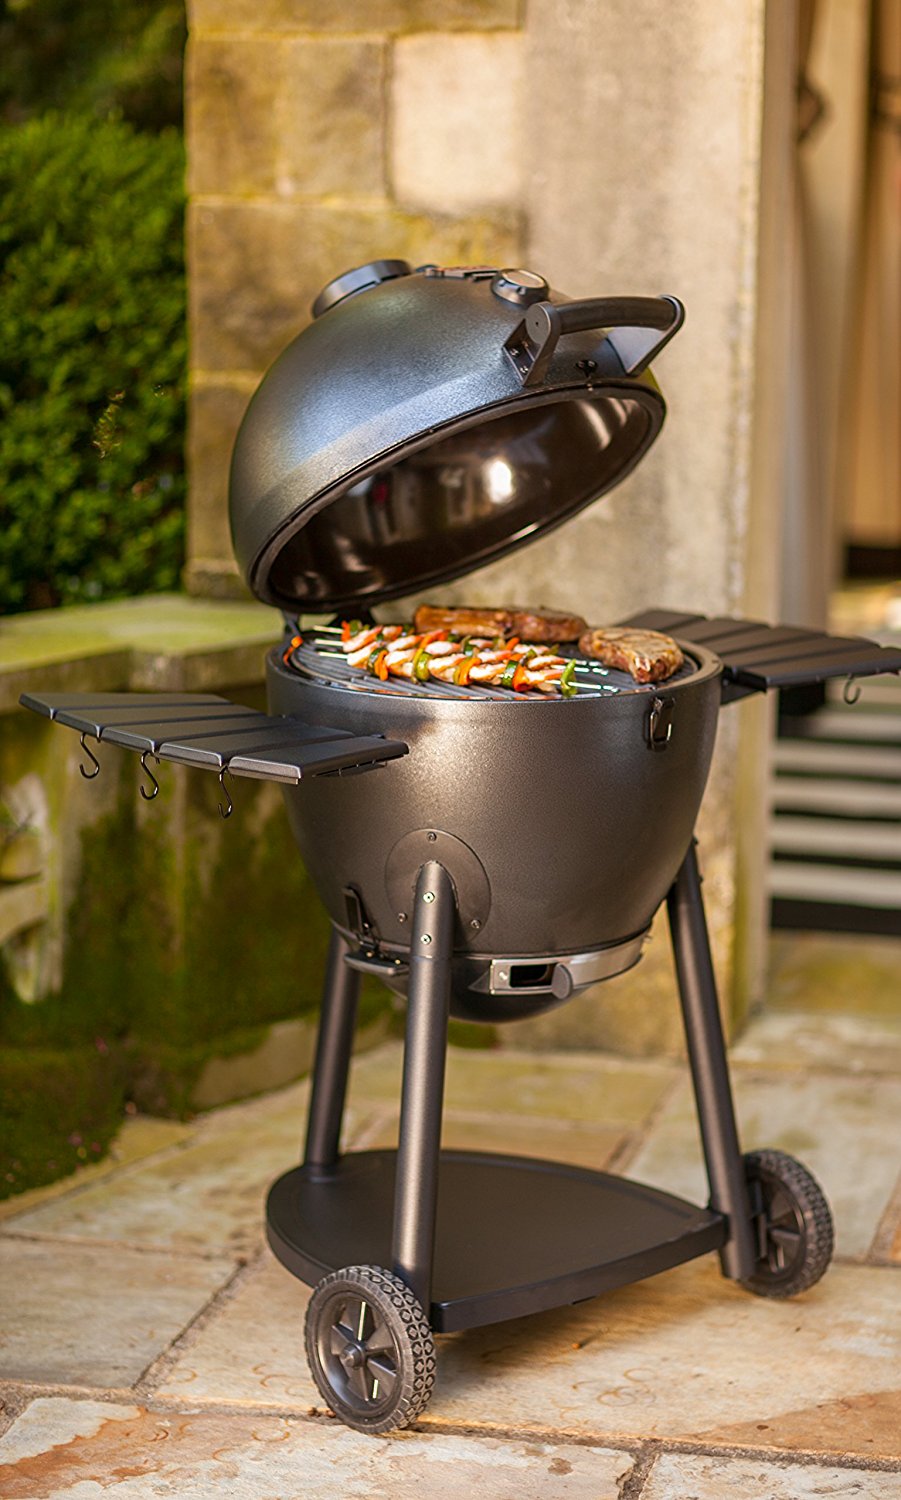 Time To Start Grilling With The Very Best- Top 10 Charcoal Grills